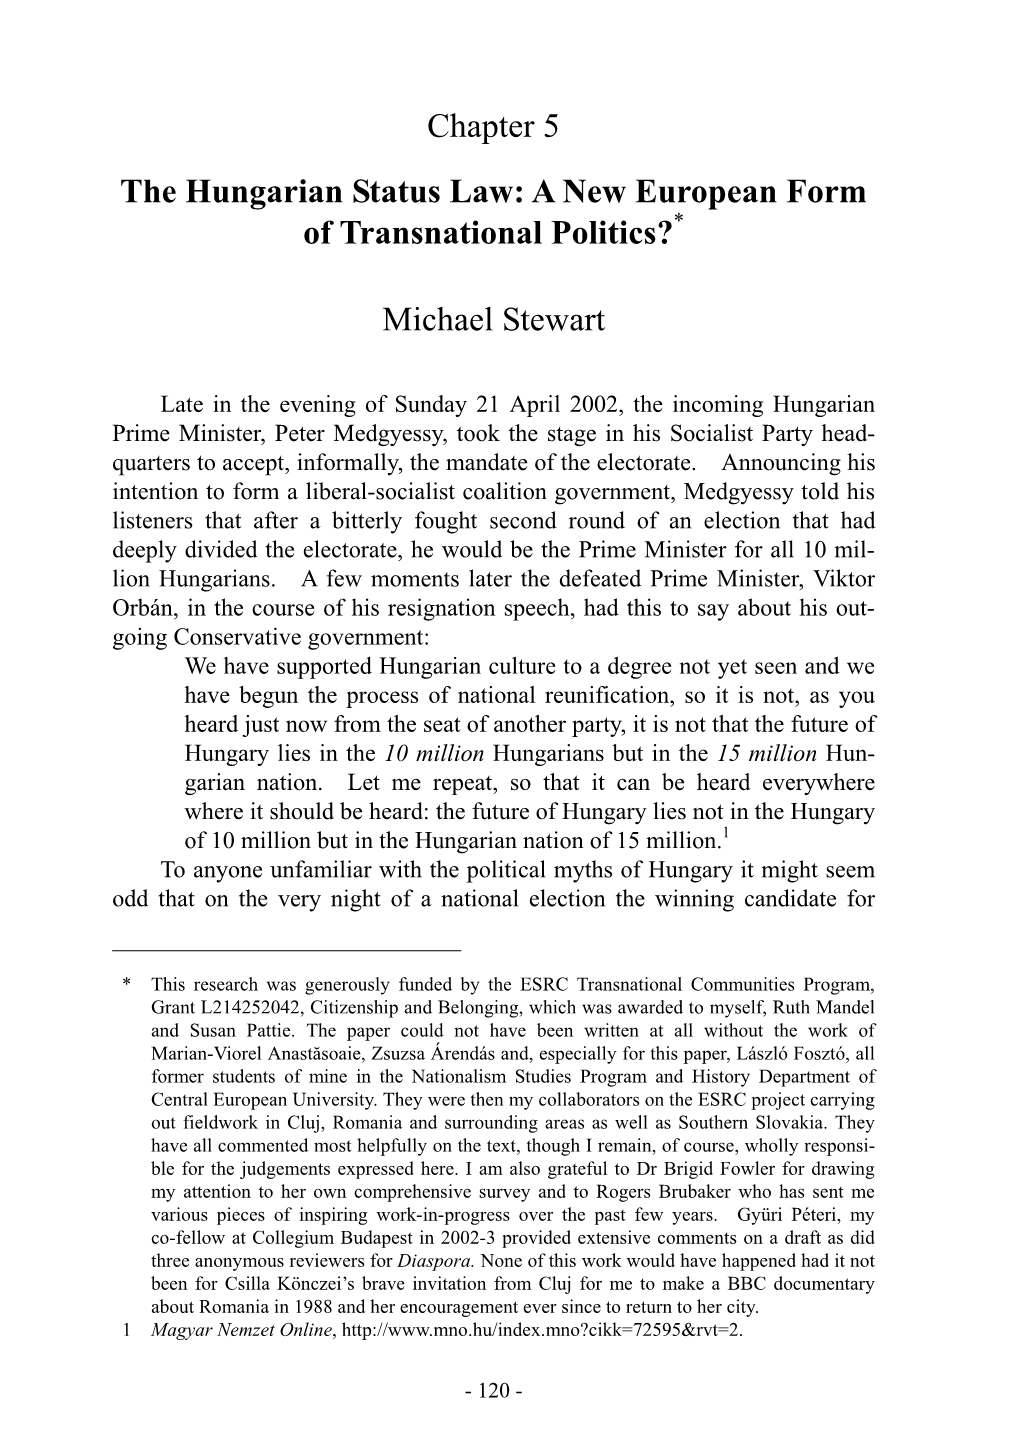 Chapter 5 the Hungarian Status Law: a New European Form of Transnational Politics?*